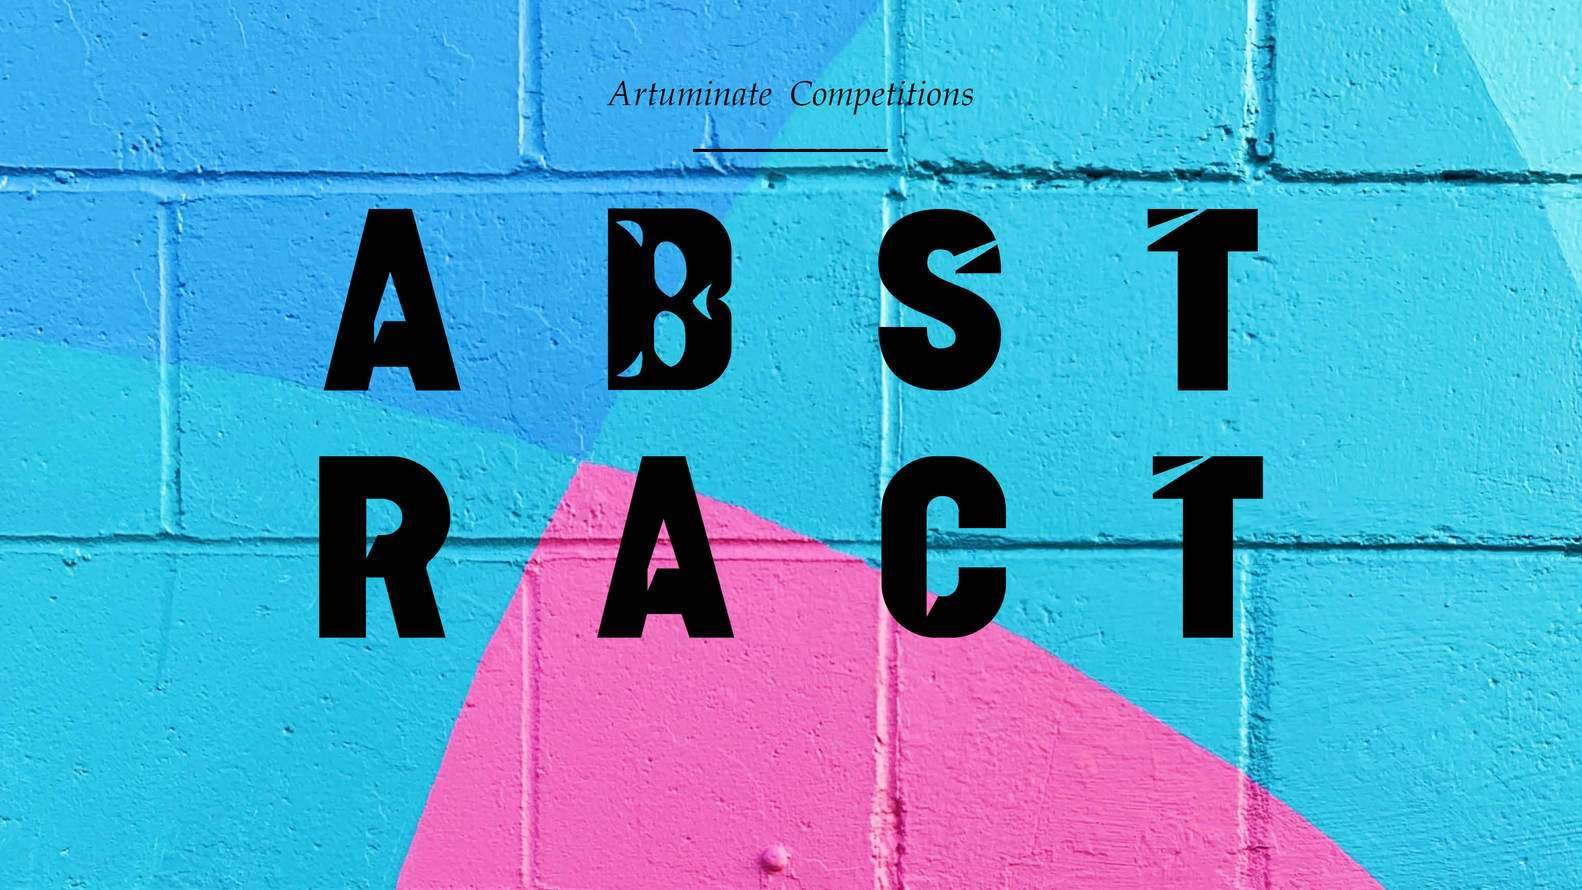 THE ABSTRACT DESIGN STYLE : Conceptual Design Challenge